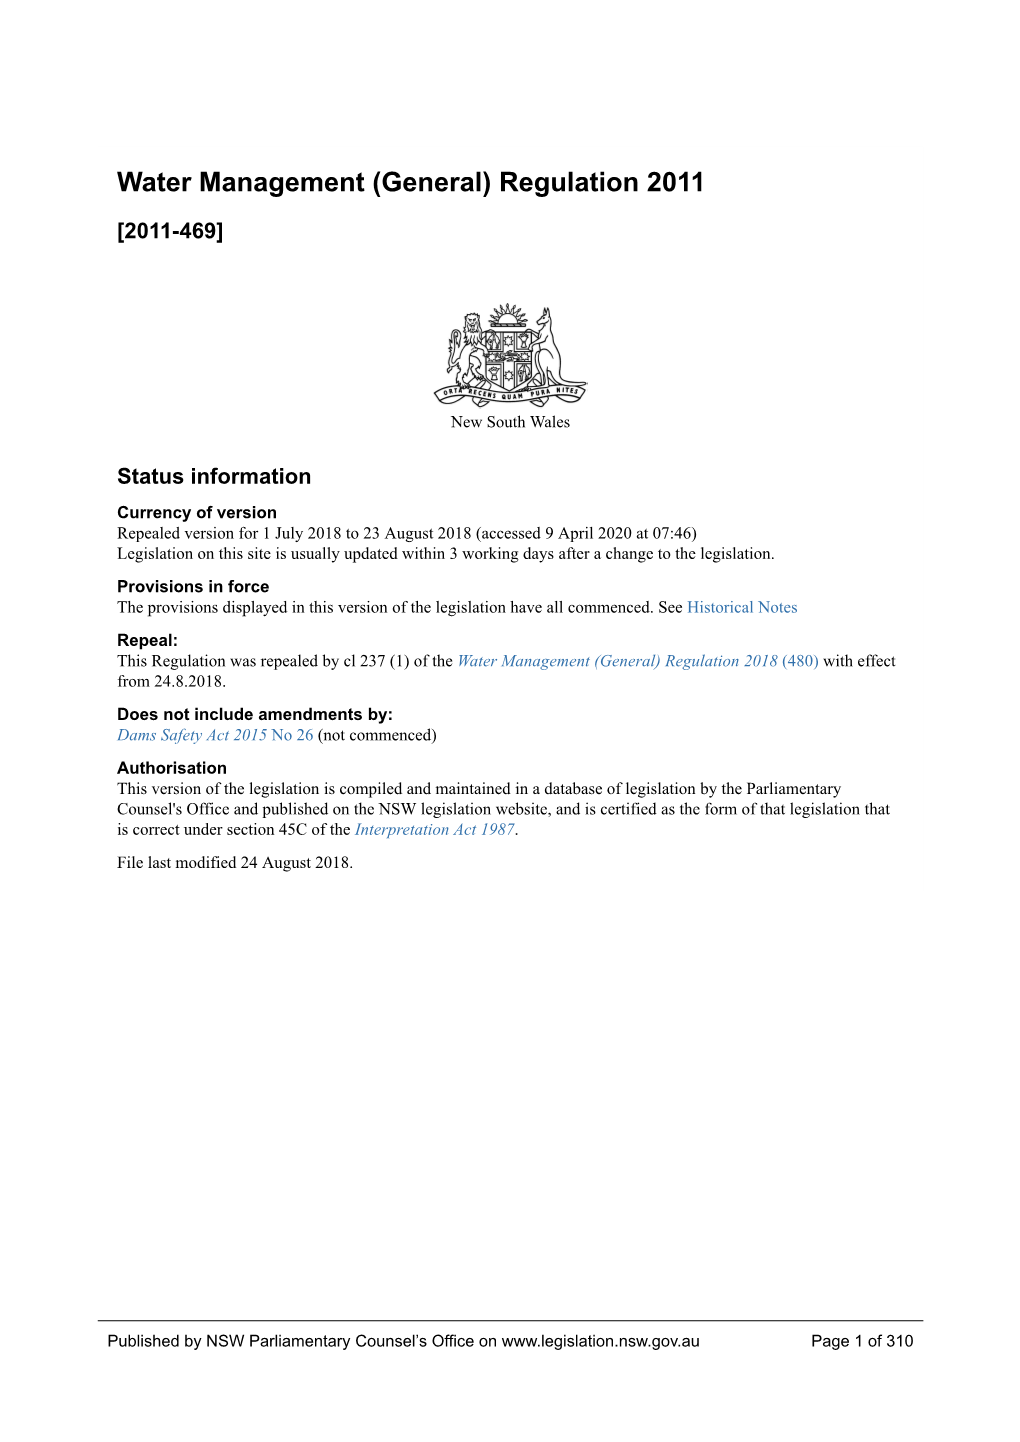 NSW Legislation Website, and Is Certified As the Form of That Legislation That Is Correct Under Section 45C of the Interpretation Act 1987